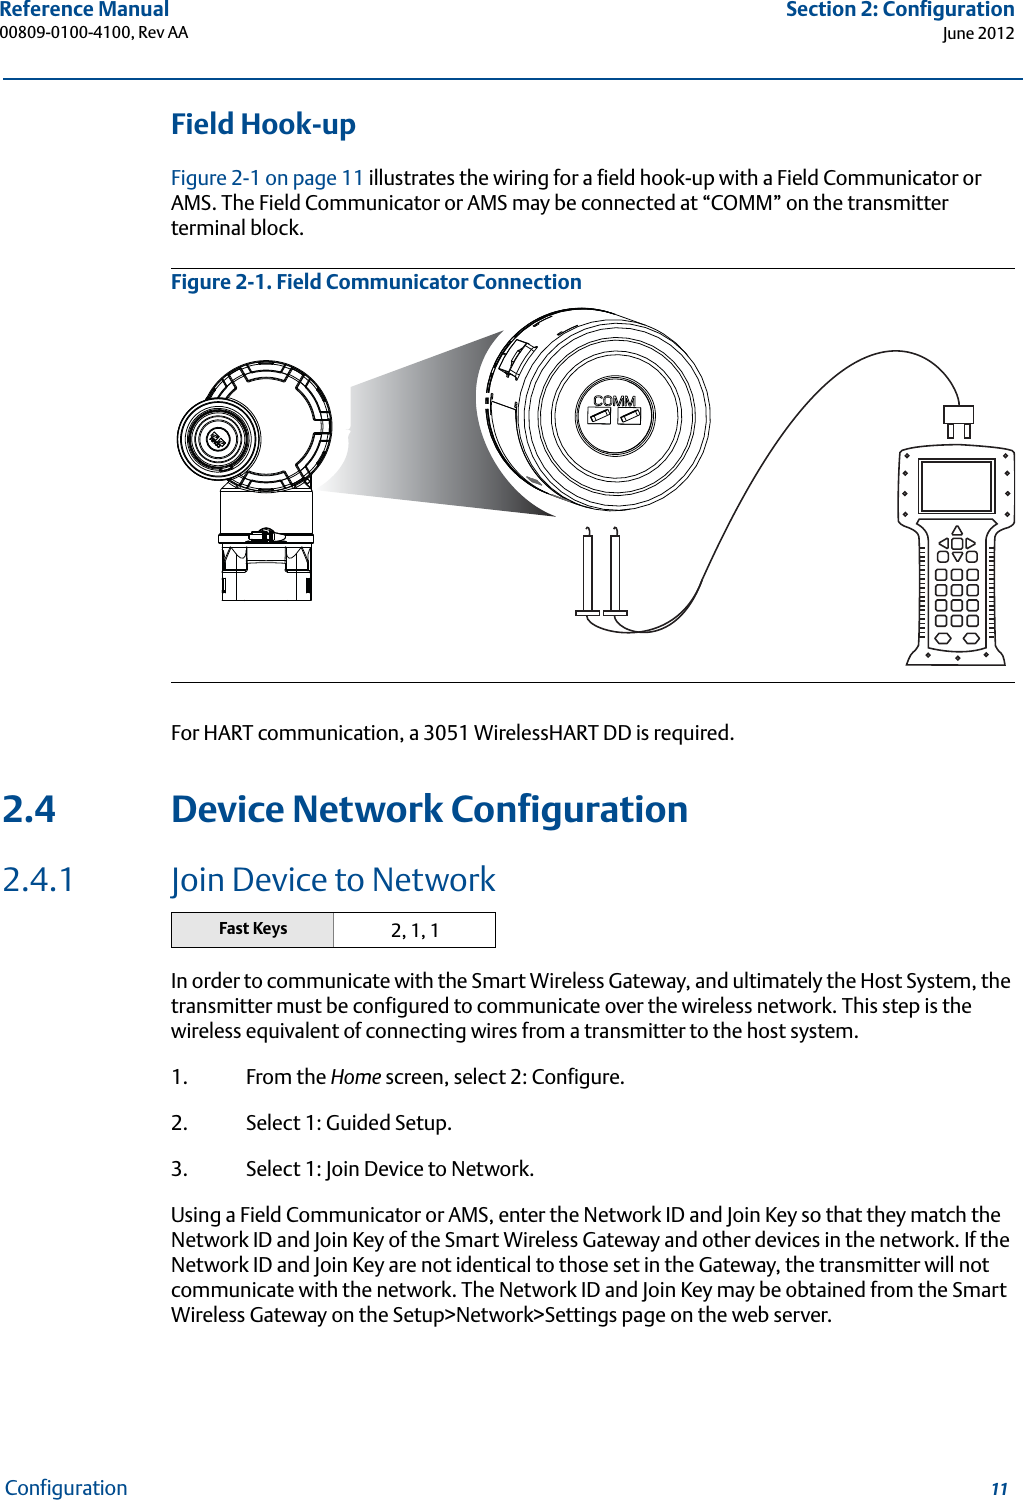 11Reference Manual 00809-0100-4100, Rev AASection 2: ConfigurationJune 2012ConfigurationField Hook-upFigure 2-1 on page 11 illustrates the wiring for a field hook-up with a Field Communicator or AMS. The Field Communicator or AMS may be connected at “COMM” on the transmitter terminal block.Figure 2-1. Field Communicator ConnectionFor HART communication, a 3051 WirelessHART DD is required.2.4 Device Network Configuration2.4.1 Join Device to NetworkIn order to communicate with the Smart Wireless Gateway, and ultimately the Host System, the transmitter must be configured to communicate over the wireless network. This step is the wireless equivalent of connecting wires from a transmitter to the host system. 1. From the Home screen, select 2: Configure.2. Select 1: Guided Setup.3. Select 1: Join Device to Network.Using a Field Communicator or AMS, enter the Network ID and Join Key so that they match the Network ID and Join Key of the Smart Wireless Gateway and other devices in the network. If the Network ID and Join Key are not identical to those set in the Gateway, the transmitter will not communicate with the network. The Network ID and Join Key may be obtained from the Smart Wireless Gateway on the Setup&gt;Network&gt;Settings page on the web server.Fast Keys 2, 1, 1